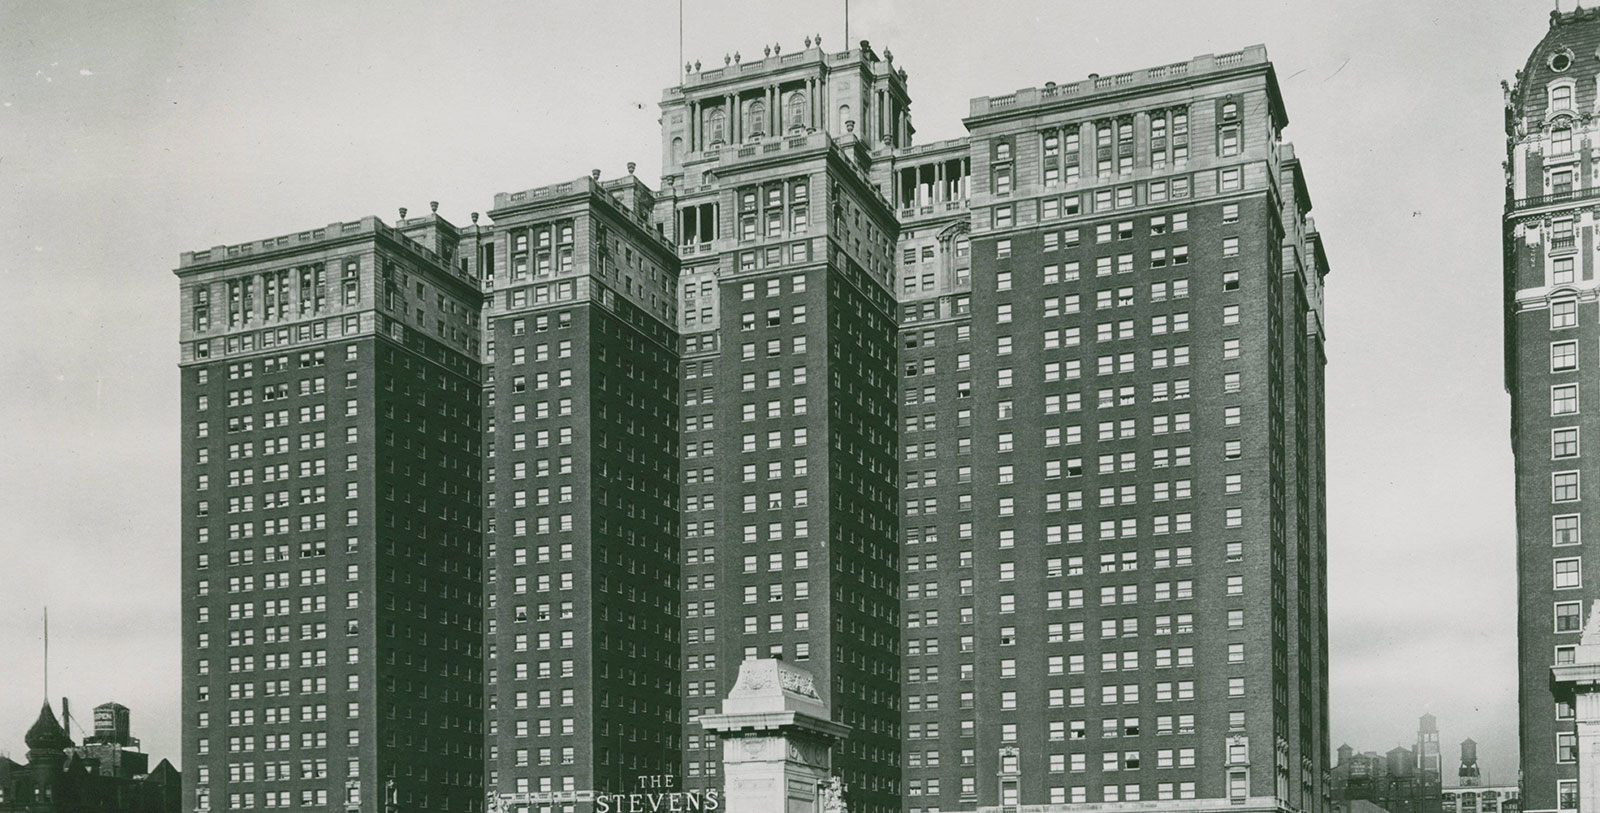 Historic Image of Stevens Hotel Exterior circa 1930, Hilton Chicago, 1927, Member of Historic Hotels of America, in Chicago, Illinois, Discover